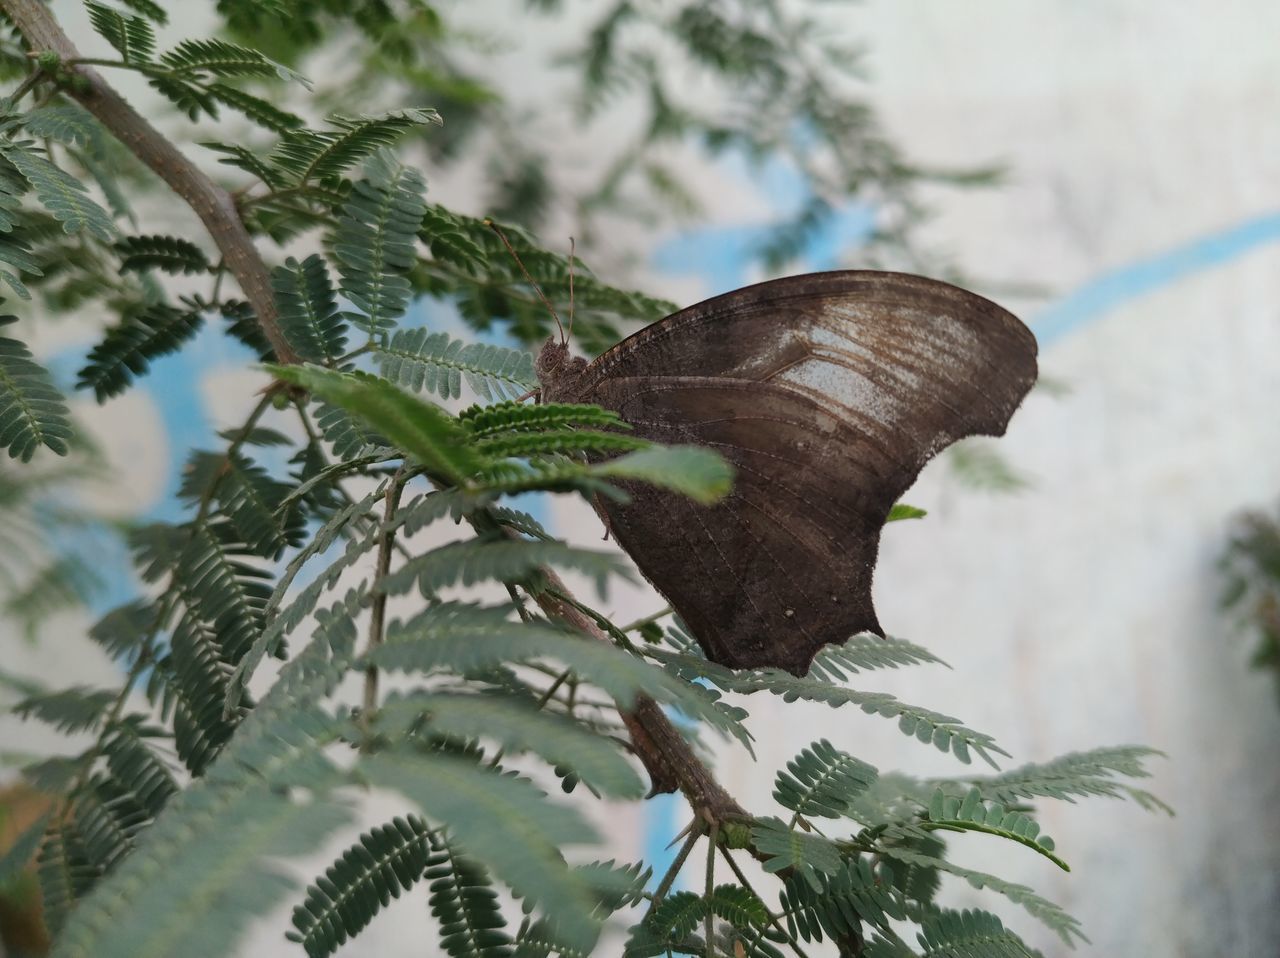 CLOSE-UP OF BUTTERFLY ON PLANTS